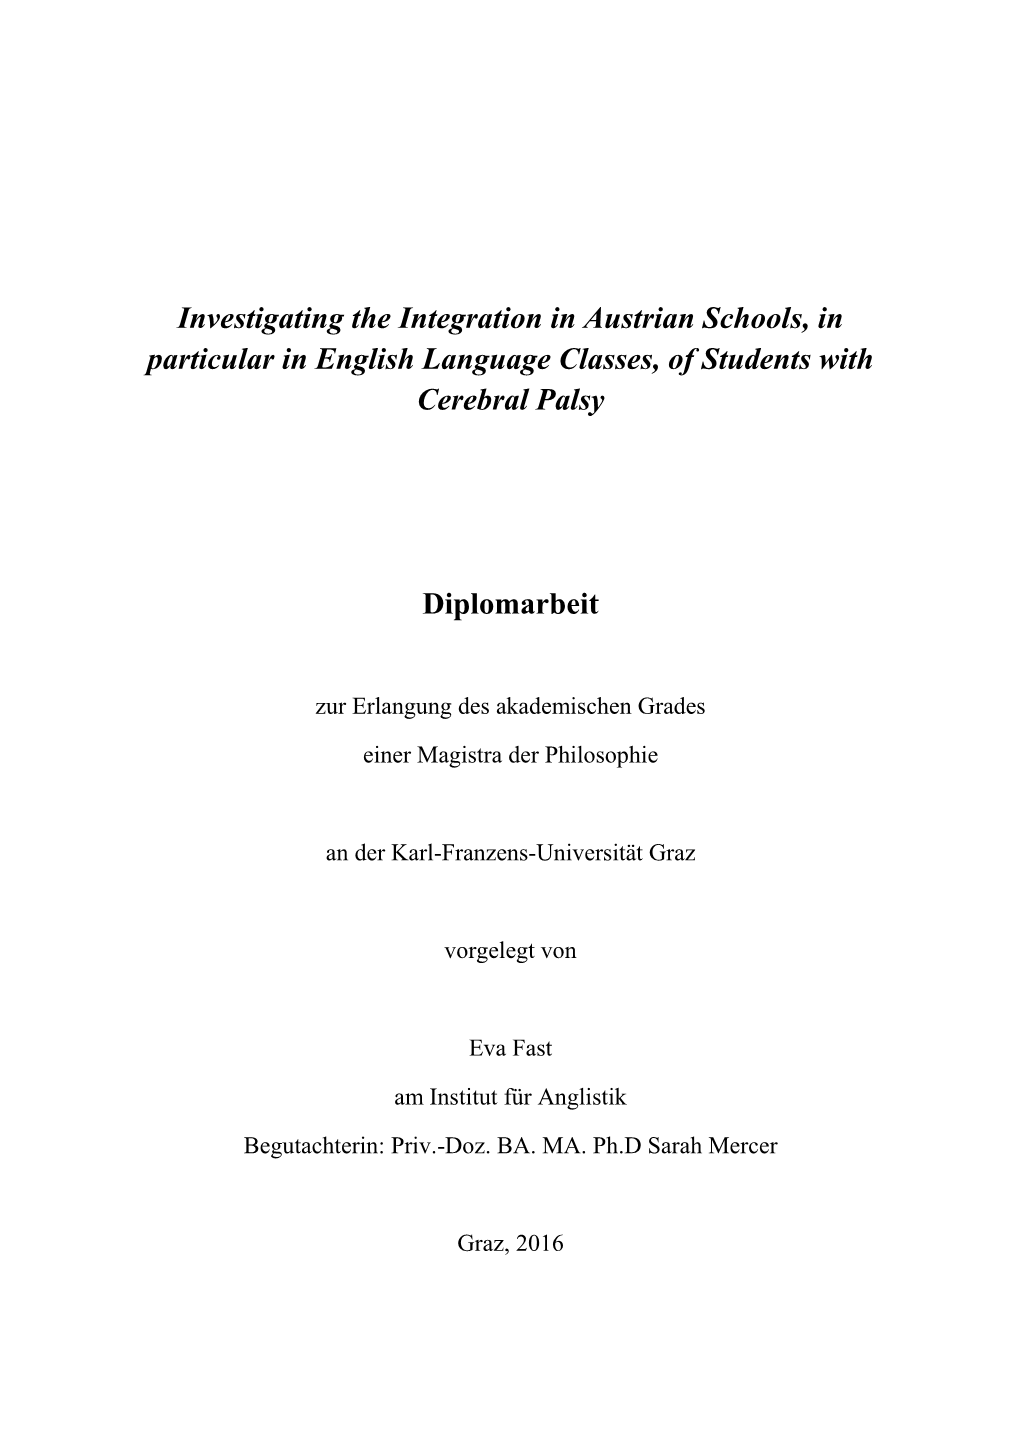 Investigating the Integration in Austrian Schools, in Particular in English Language Classes, of Students with Cerebral Palsy